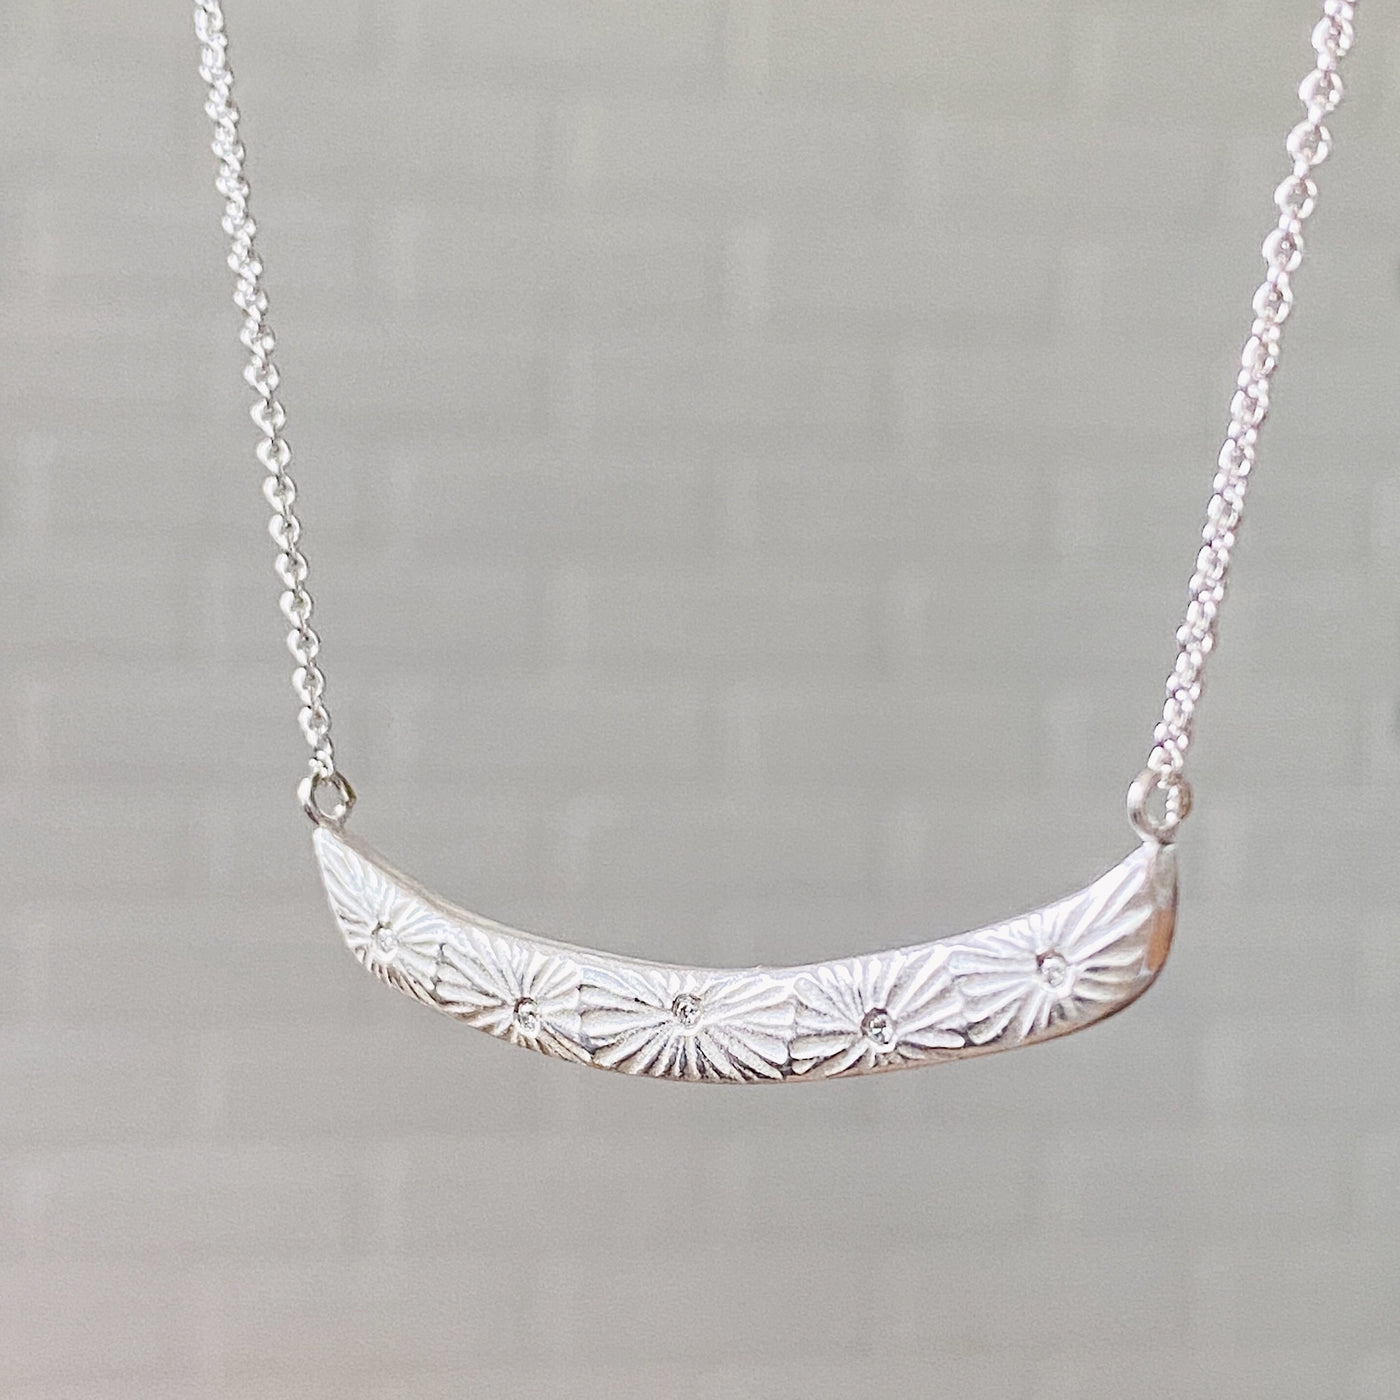 Sterling silver curved bar necklace with five scattered diamonds and an engraved sunburst pattern radiating from each side view | Corey Egan